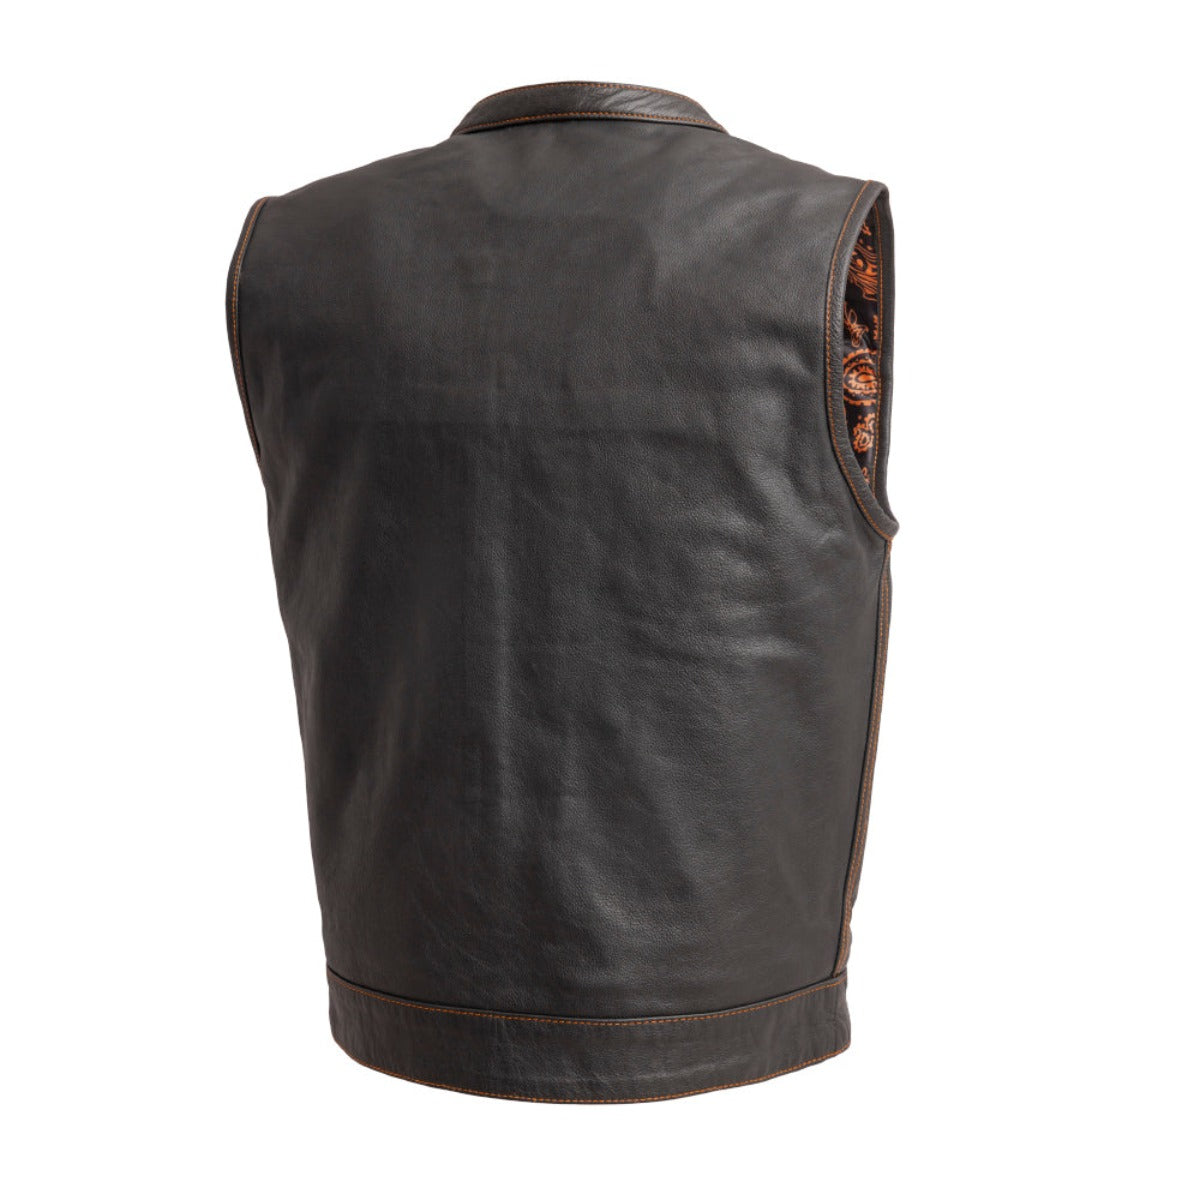 A budget-friendly alternative, the back view of a First Manufacturing Men's The Cut Motorcycle Leather Vest, Black/Orange made from milled cowhide.